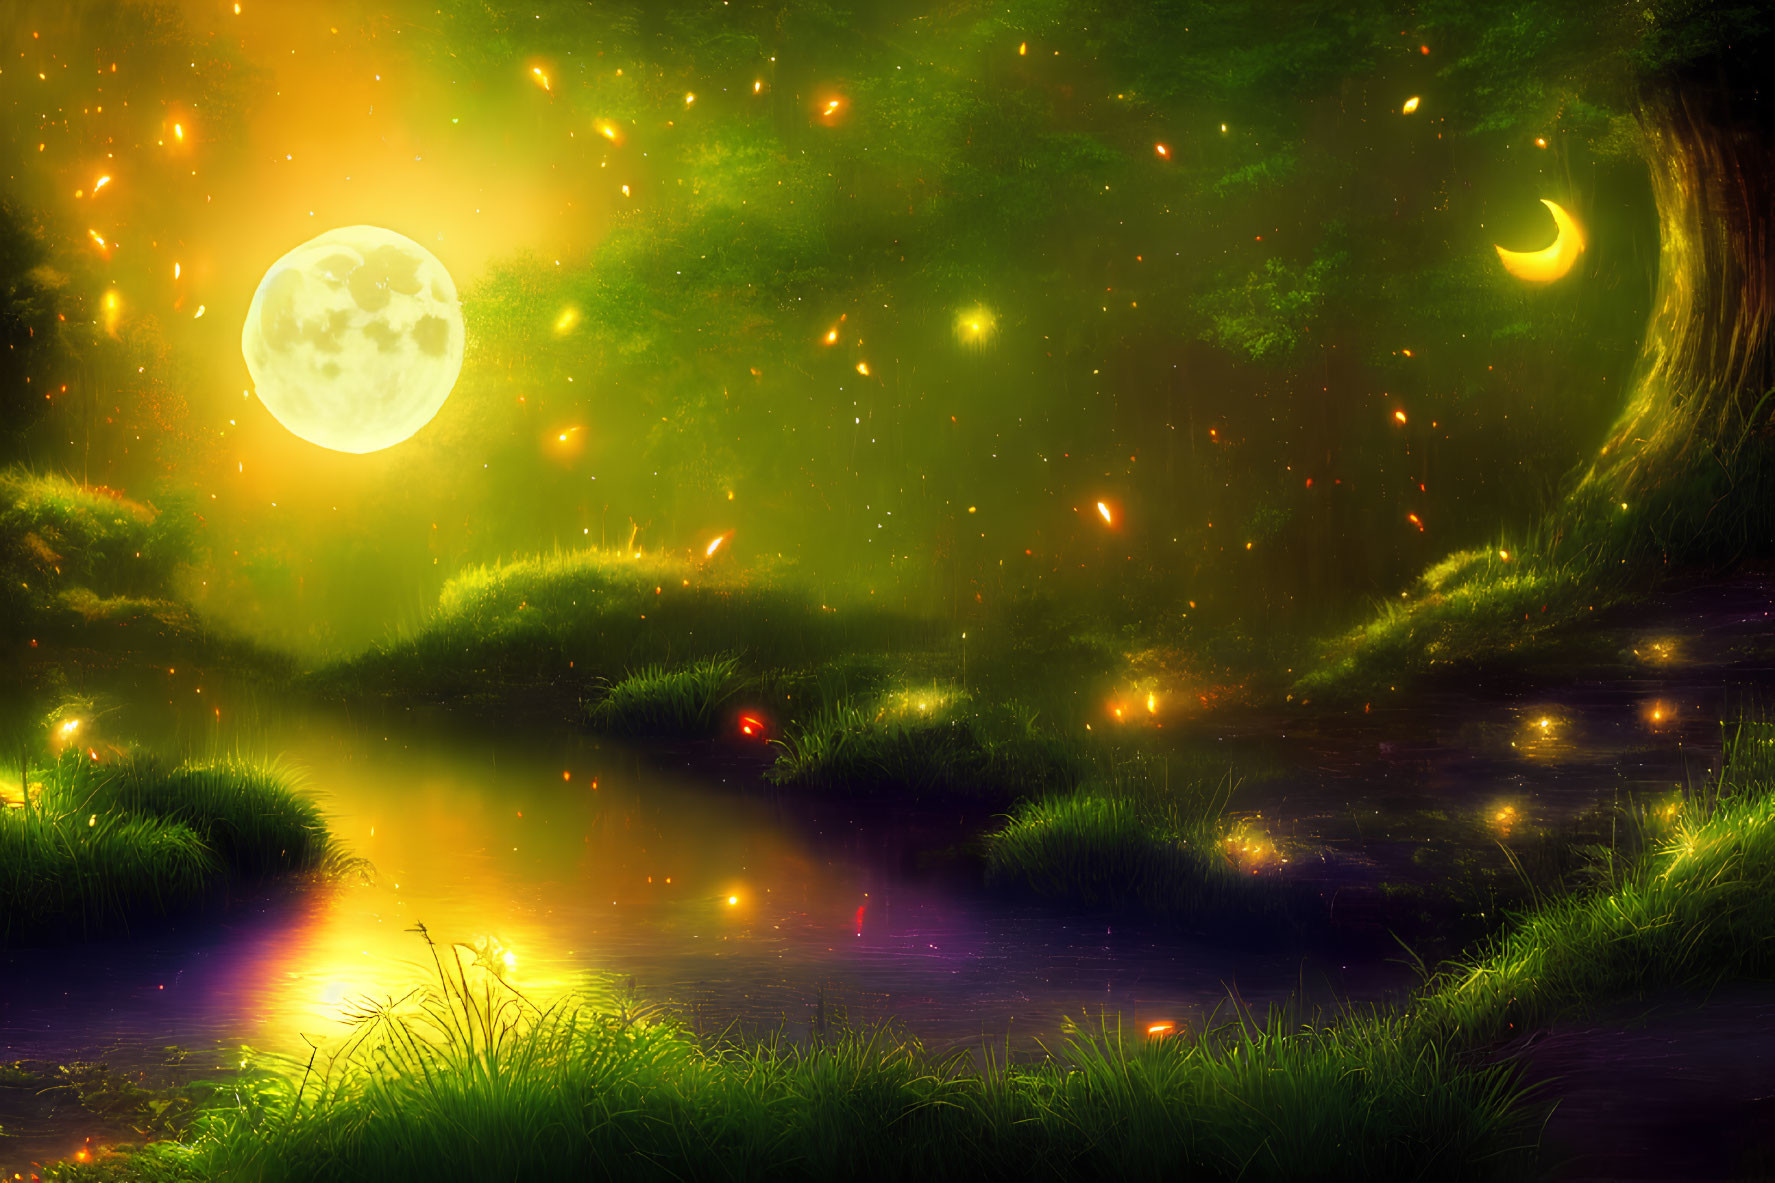 Fantasy landscape with glowing moon, sparkling river, lush greenery, and floating lights